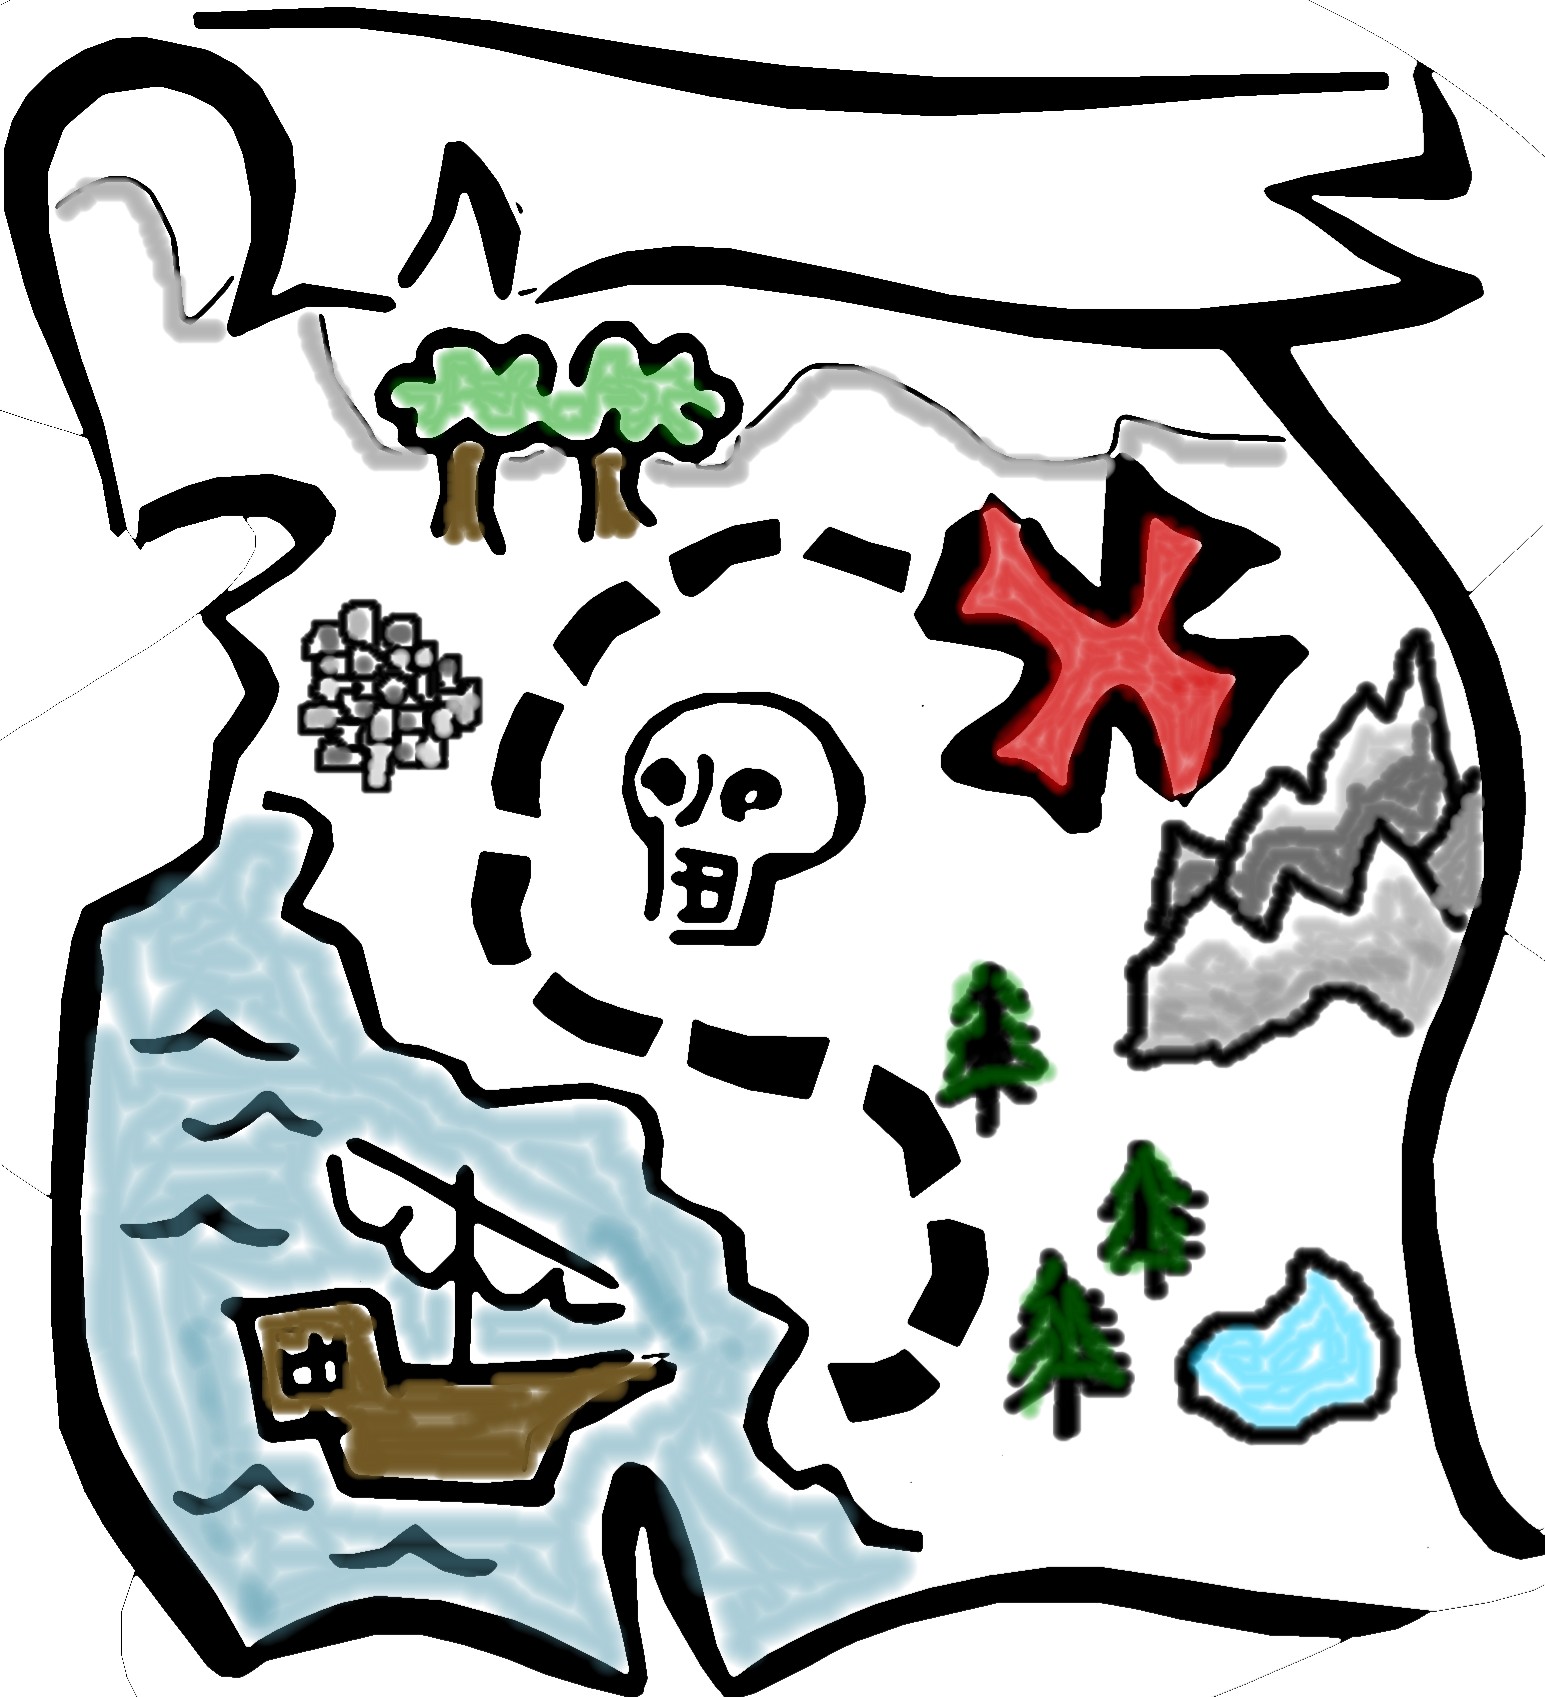 Pirate treasure map clipart free images 2